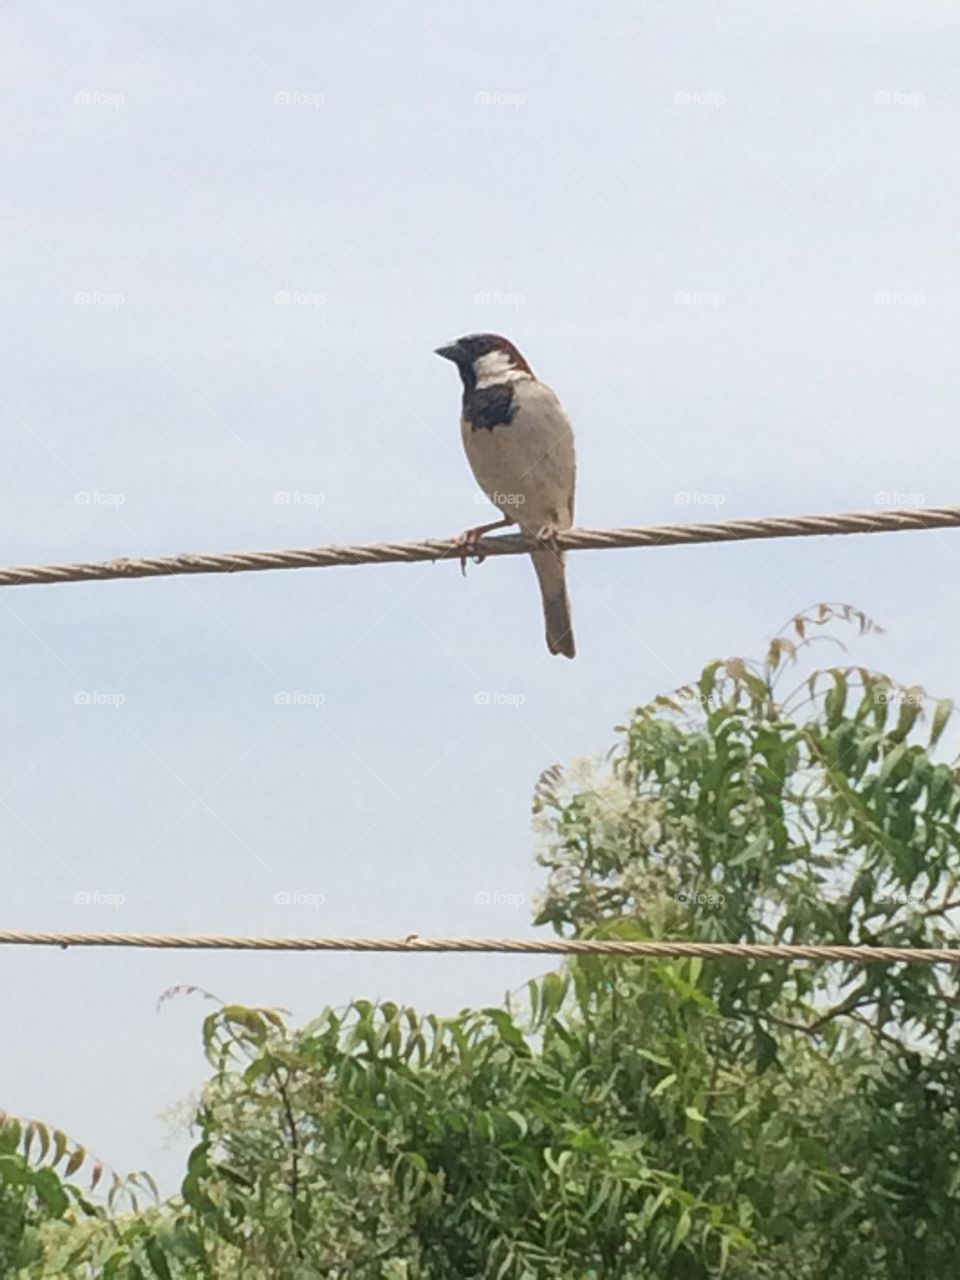 Sparrow at wire